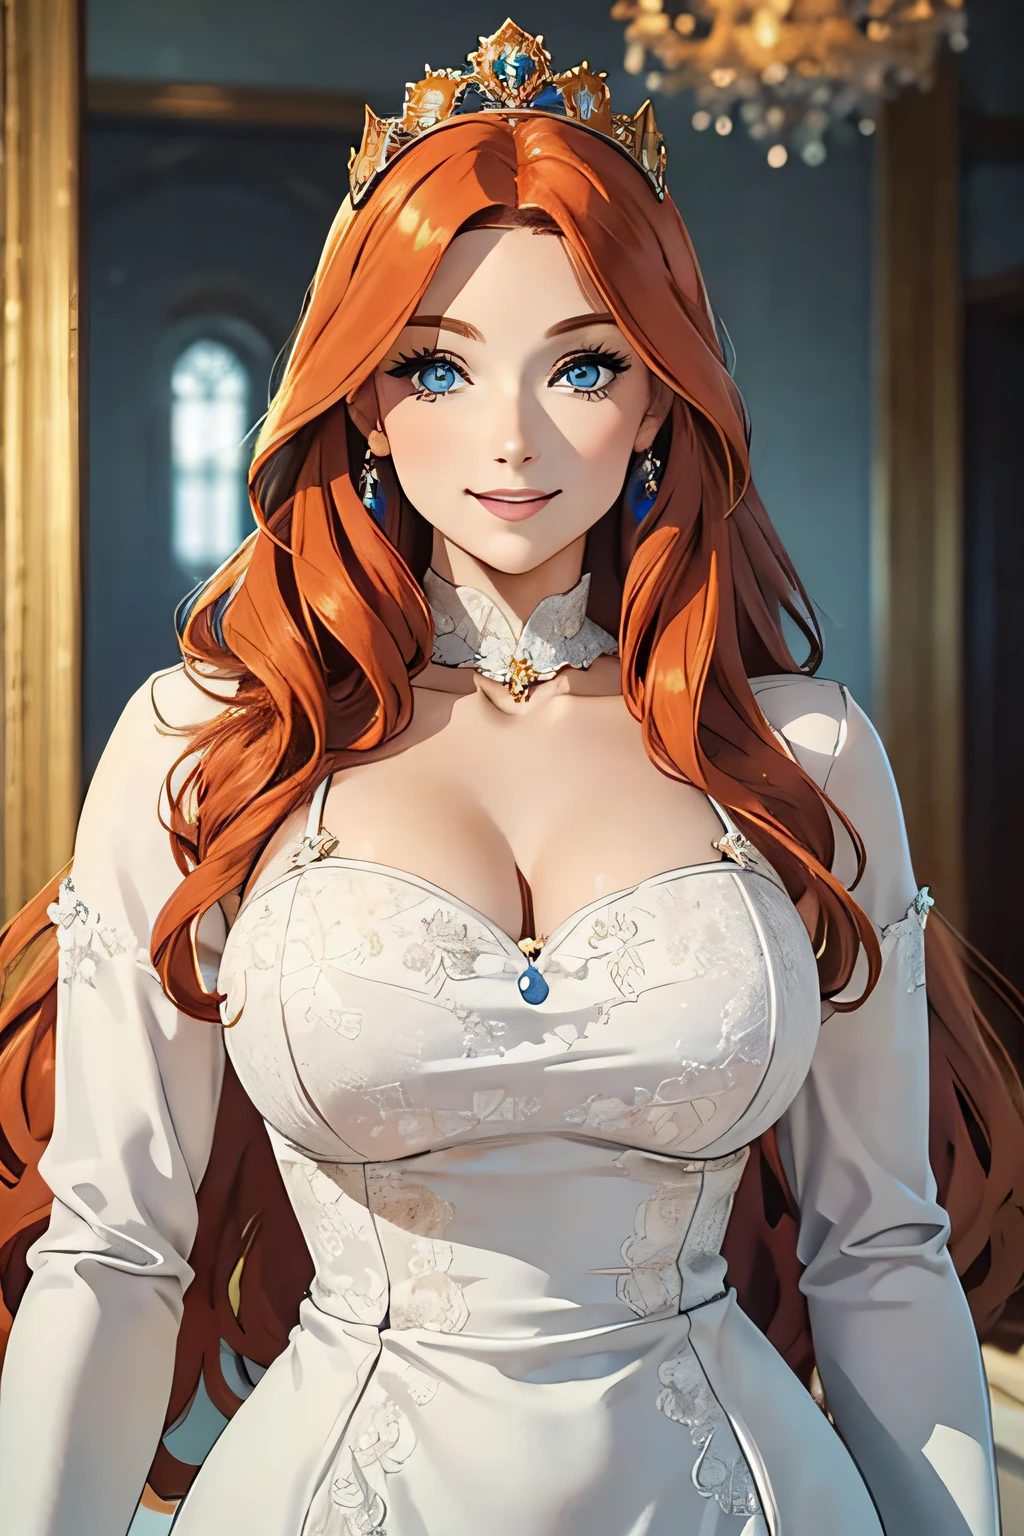 pretty face, woman, ginger long hair, blue eyes, curvy body, white dress, smiling, masterpiece, crown, golden details, princess, tall